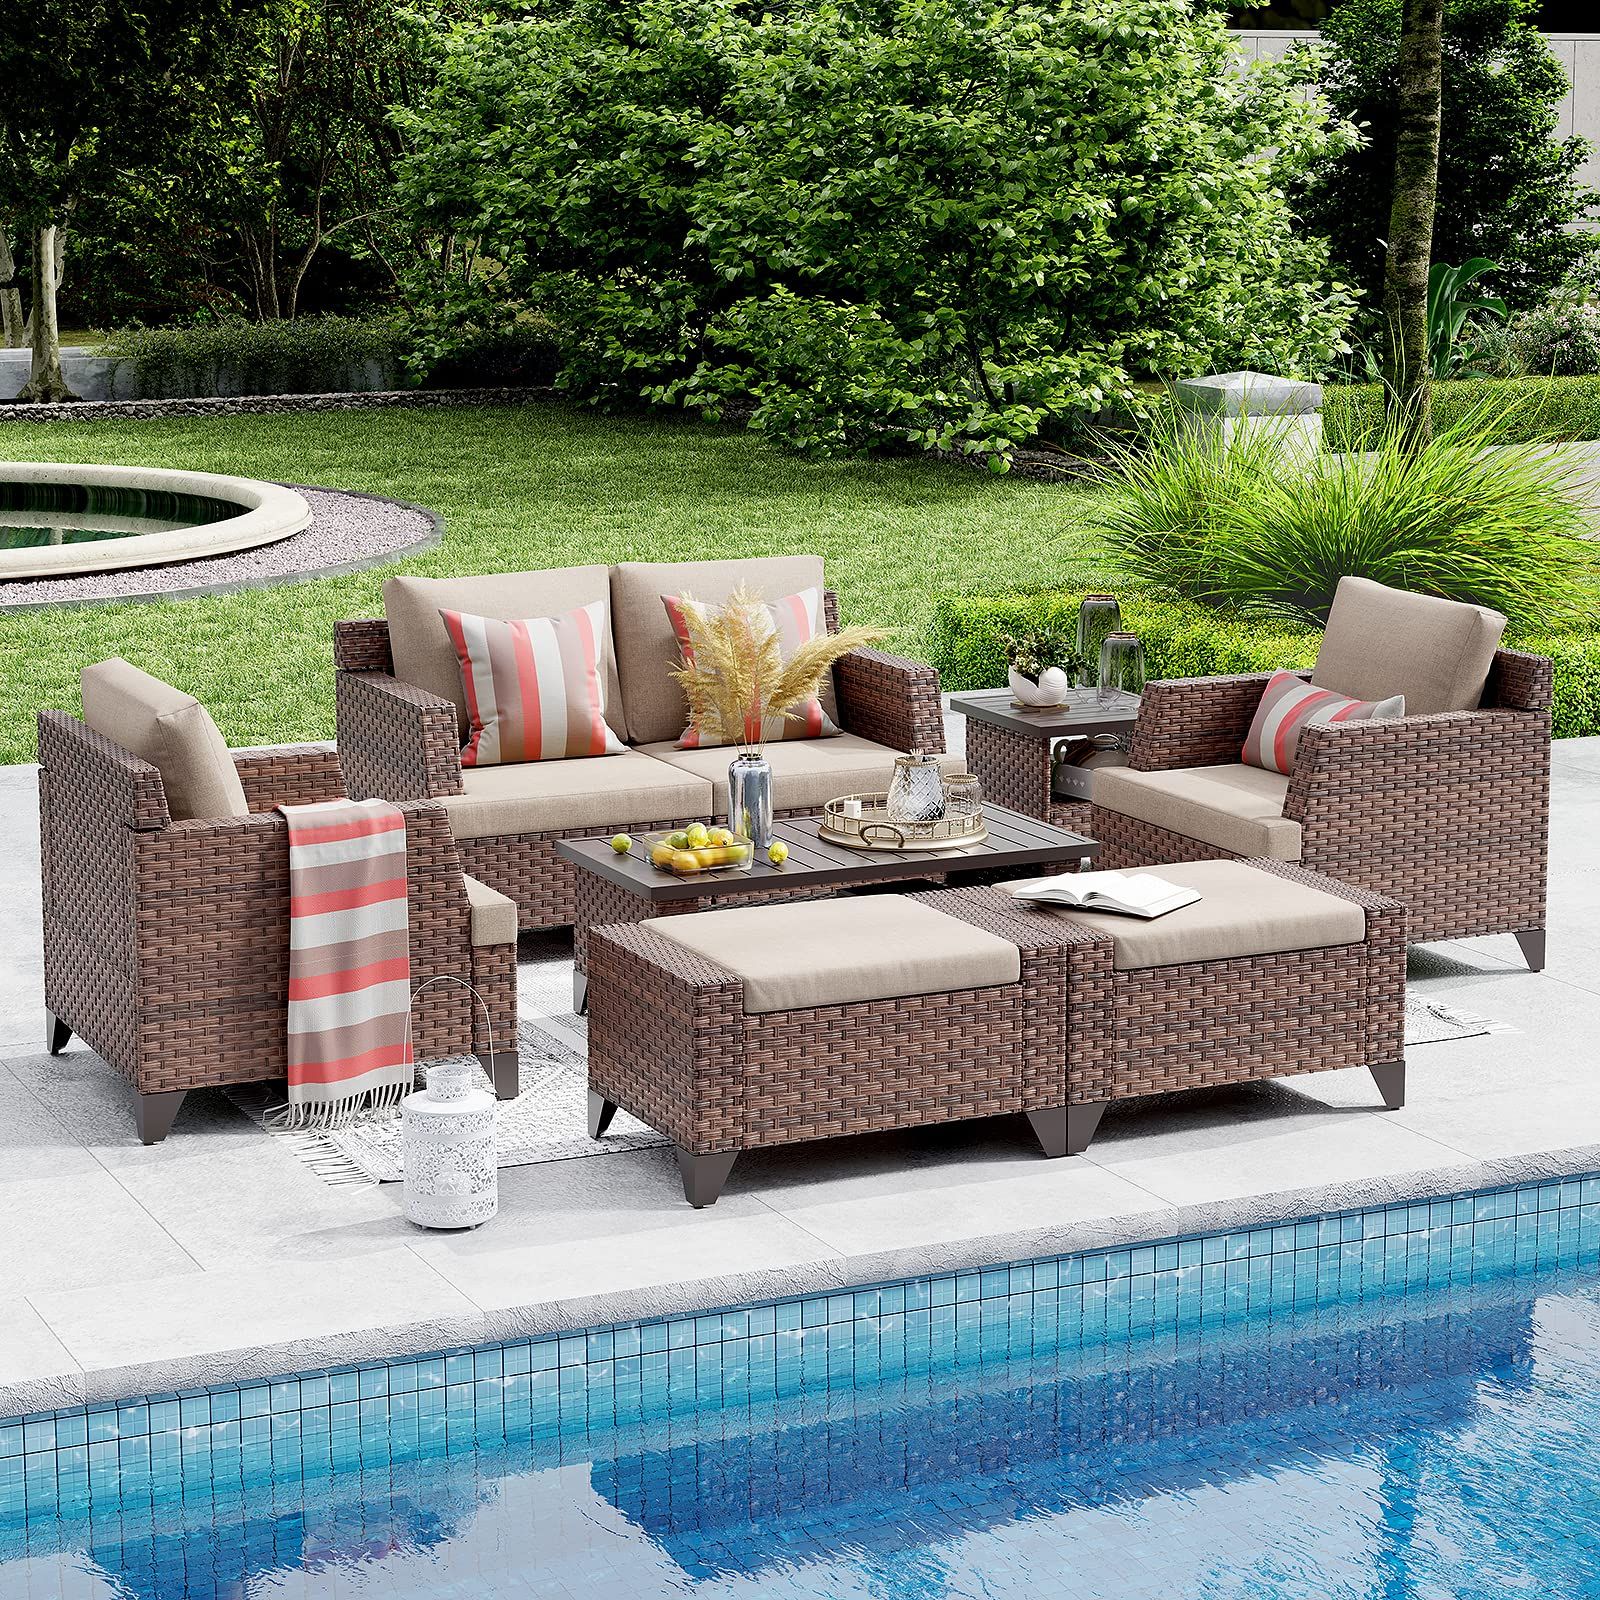 Famous 8 Piece Patio Rattan Outdoor Furniture Set Within Amazon: Sunsitt Outdoor Furniture Set 8 Piece Patio Rattan Furniture Set,  Patio Lounge Chairs With Ottoman & Loveseat With Waterproof Covers, Brown  Wicker With Beige Olefin Cushions : Patio, Lawn & Garden (View 2 of 15)